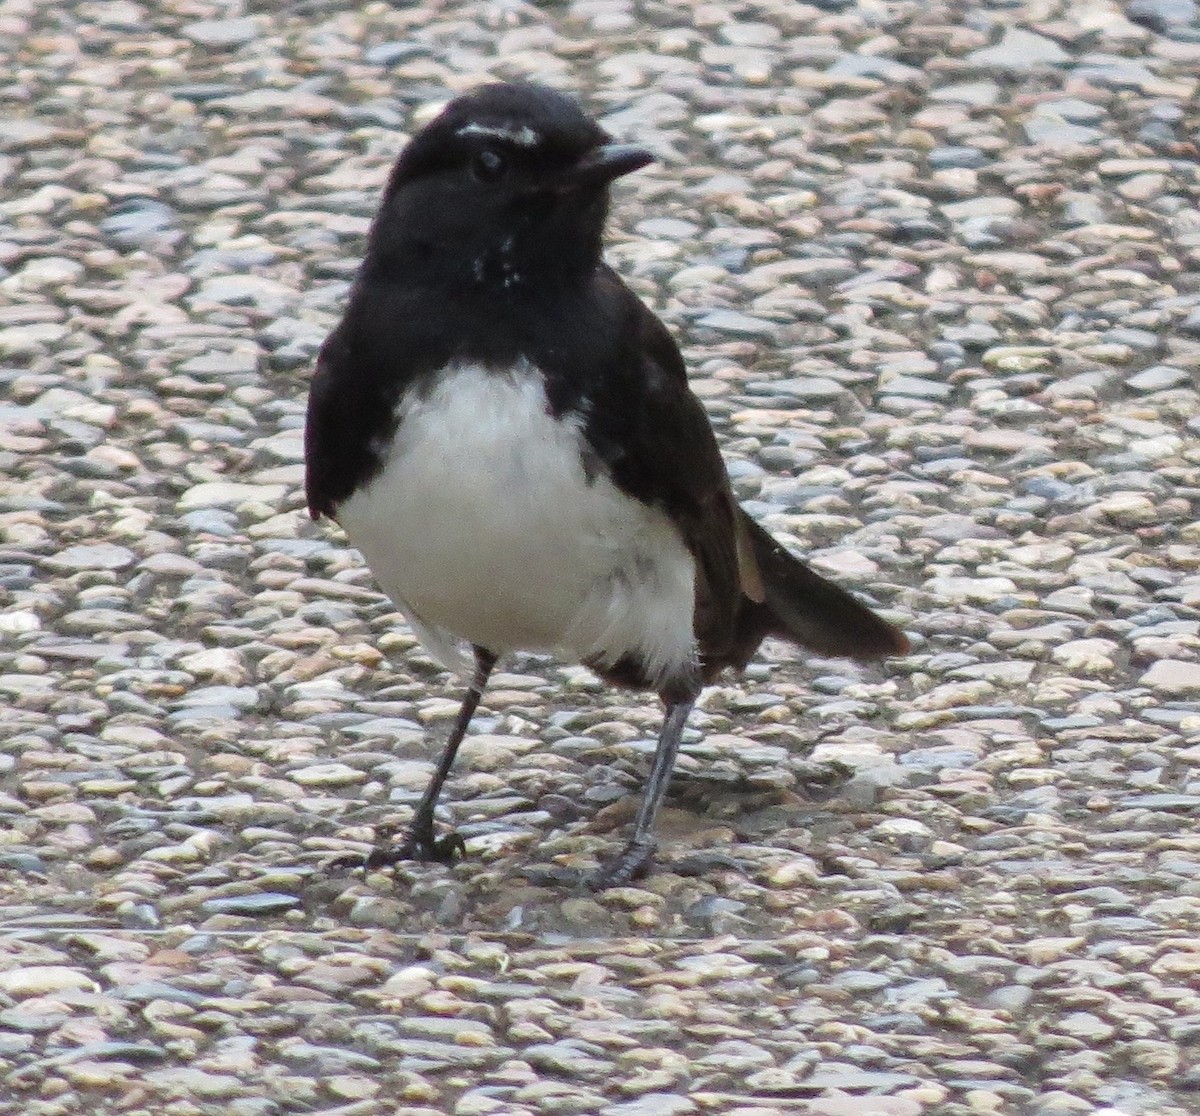 Willie-wagtail - Gregg Severson